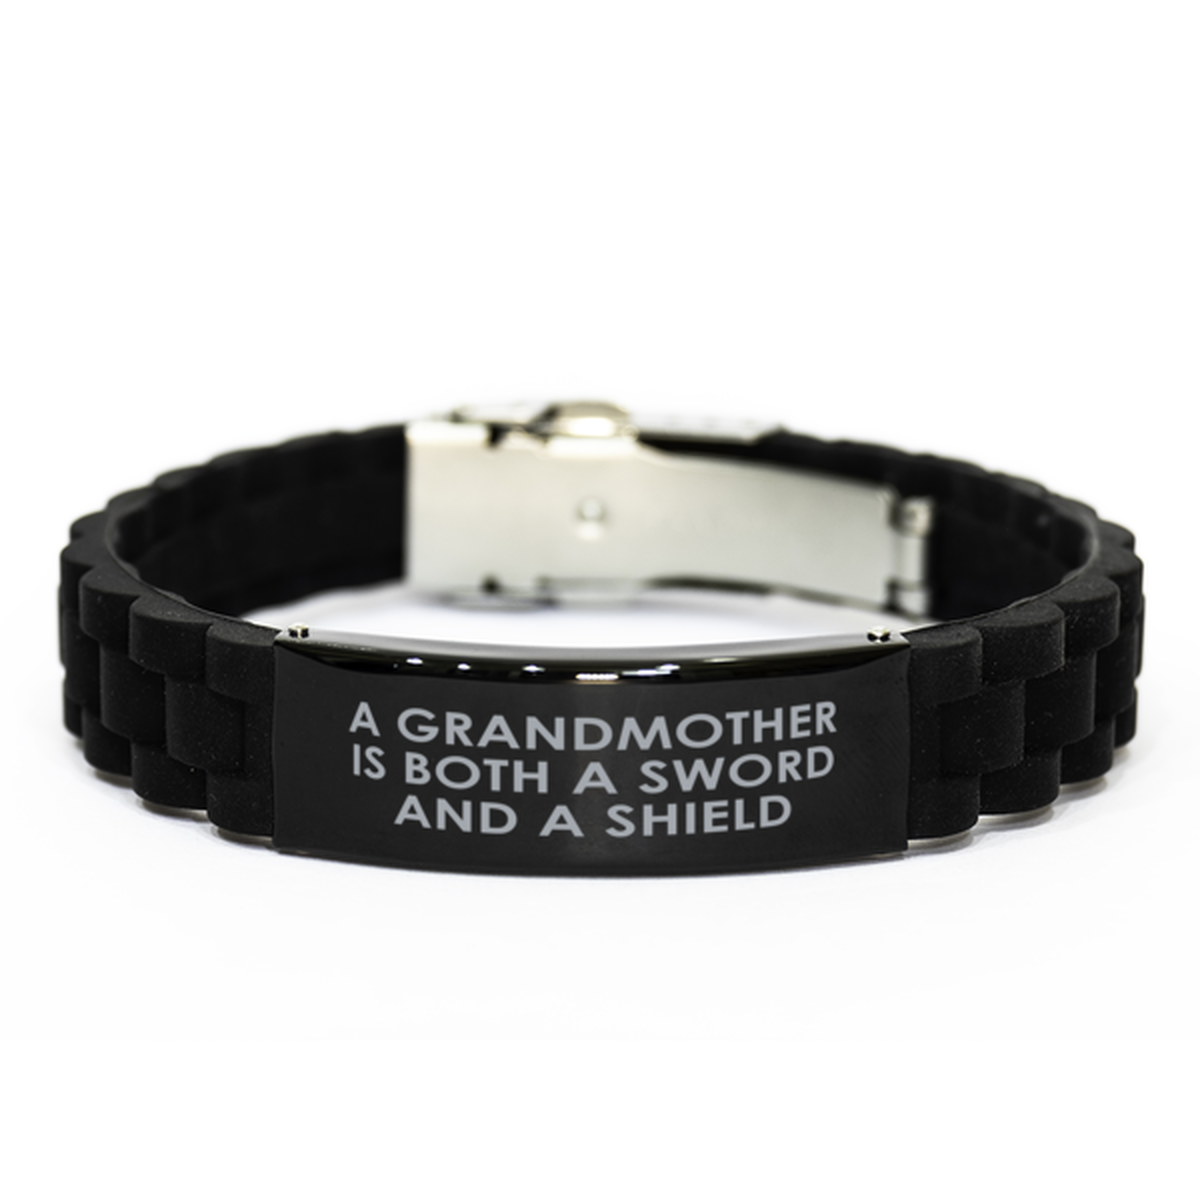 To My Grandma Black Bracelet, Sword And A Shield, Mothers Day Gifts For Grandma From Granddaughter, Birthday Gifts For Women